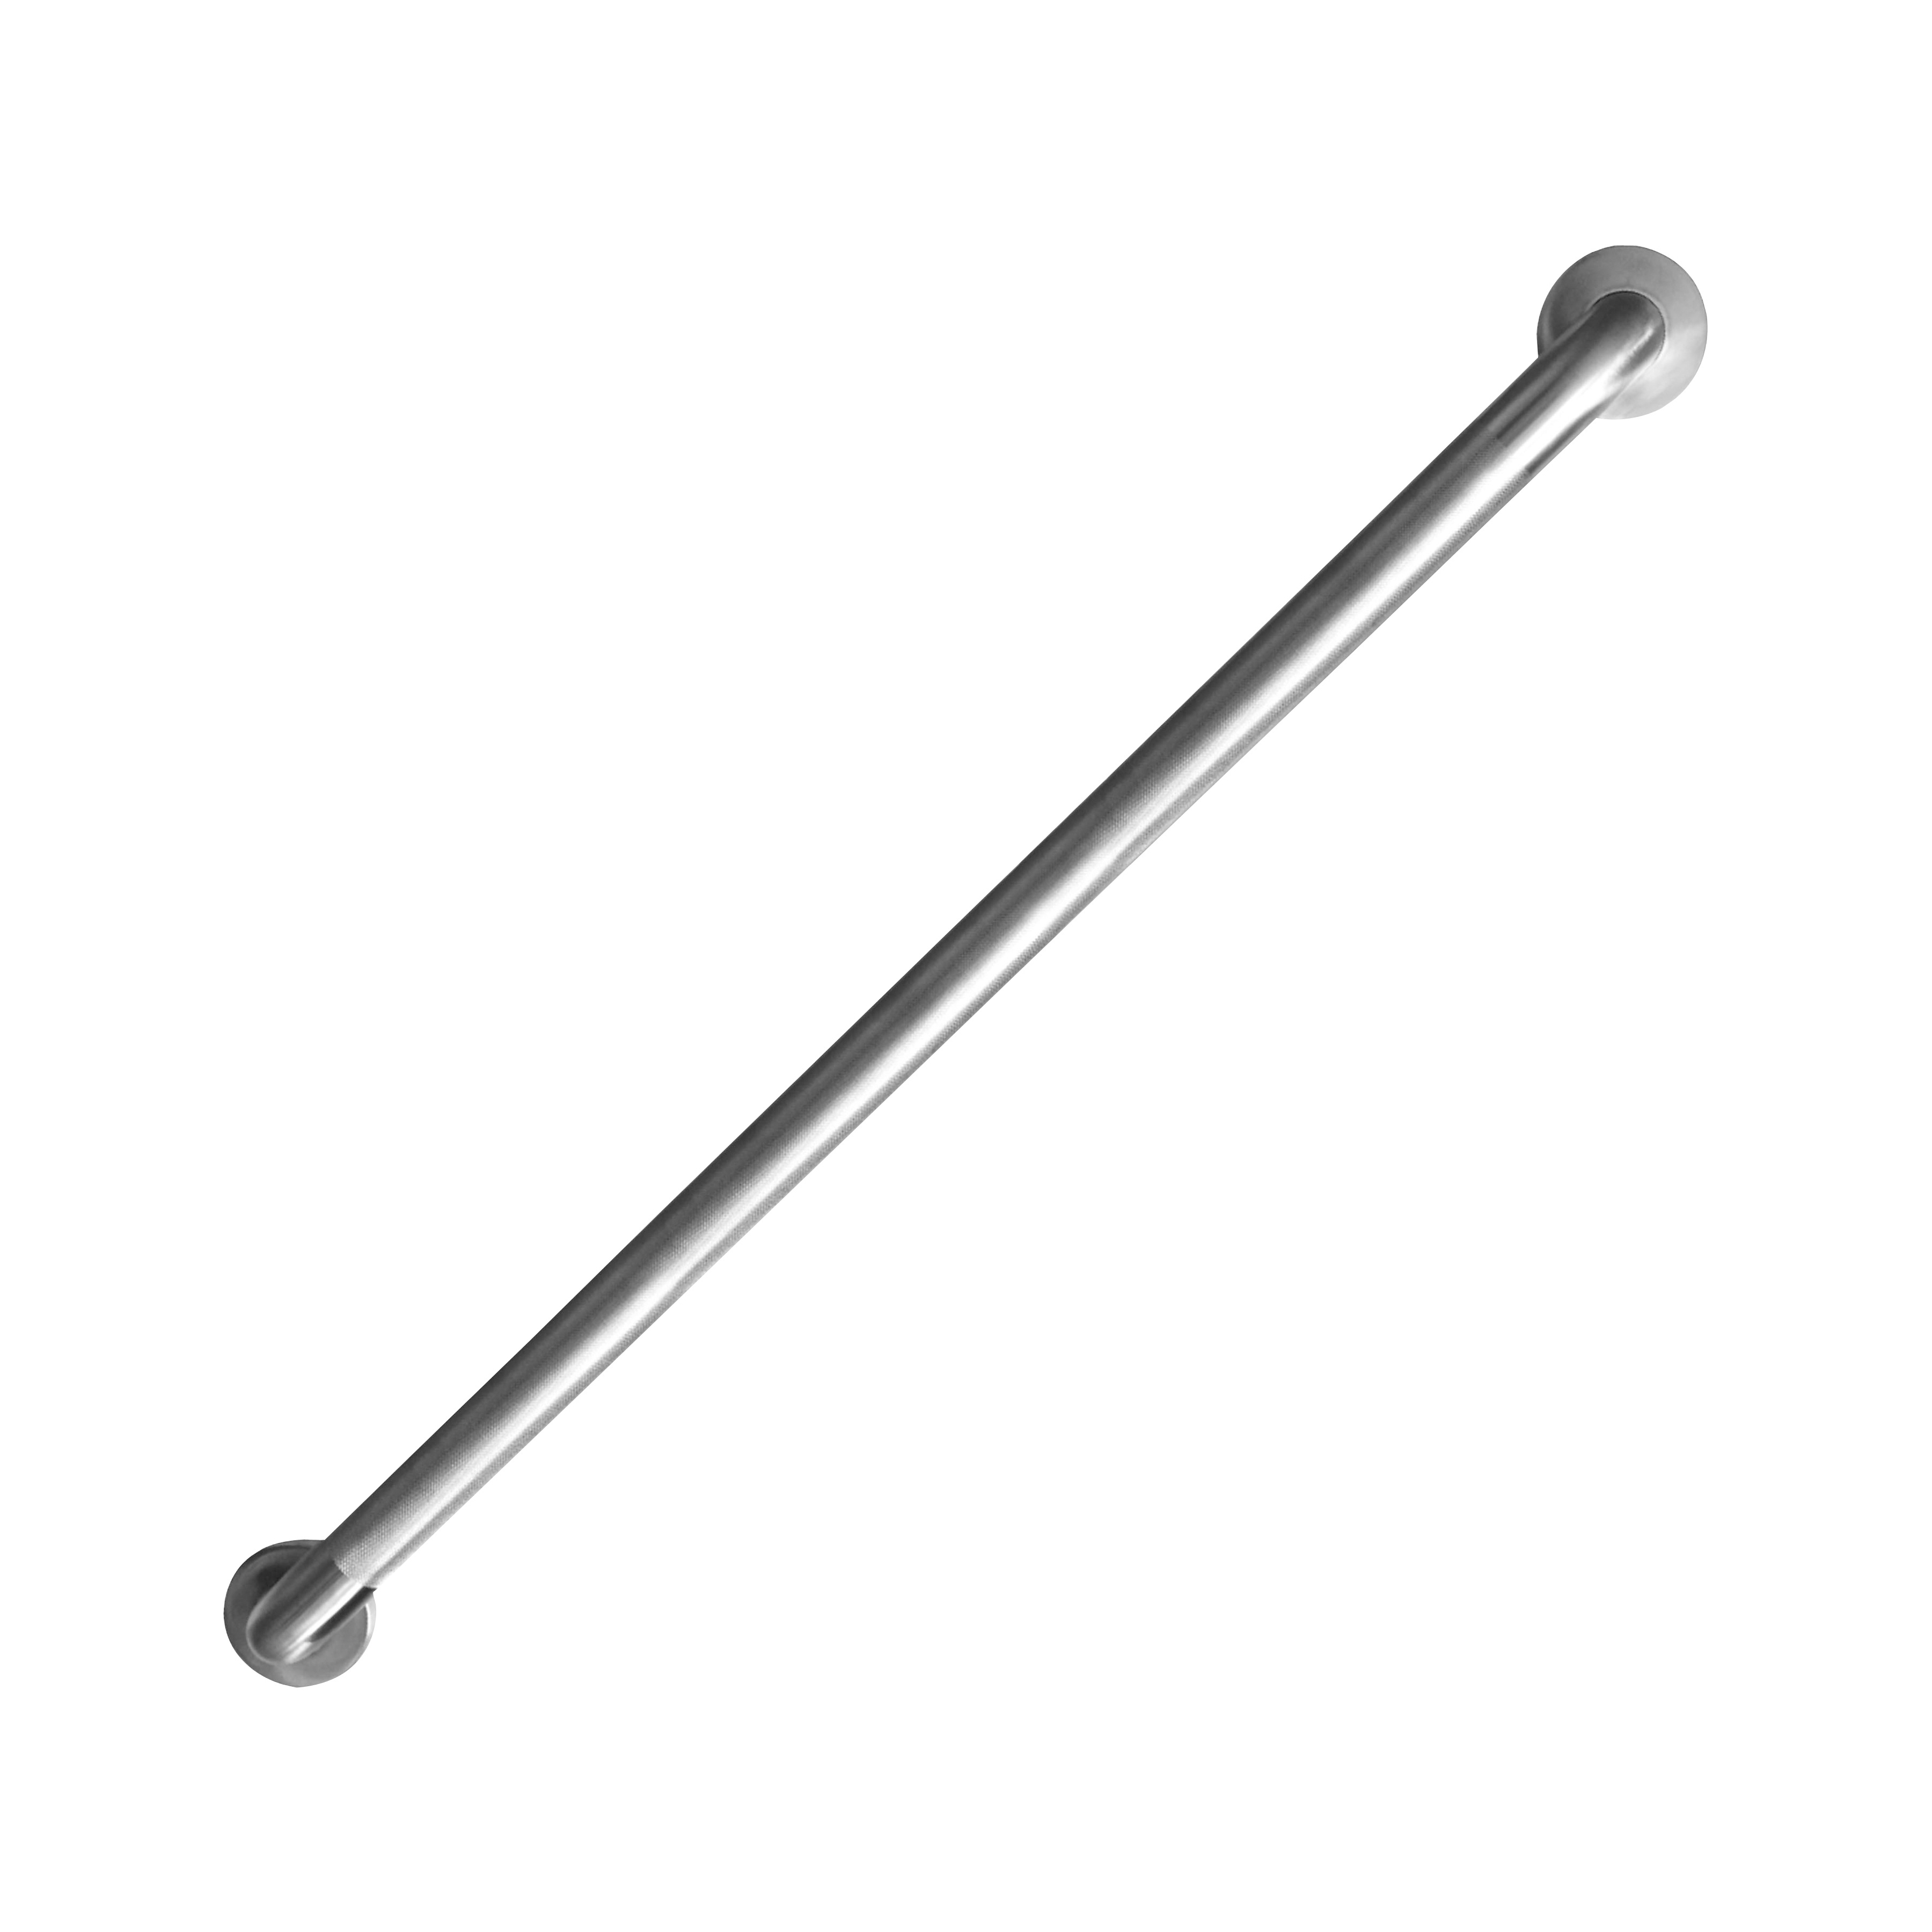 SG01-01&0436 Grab Bar, 36 in L Bar, Stainless Steel, Wall Mounted Mounting